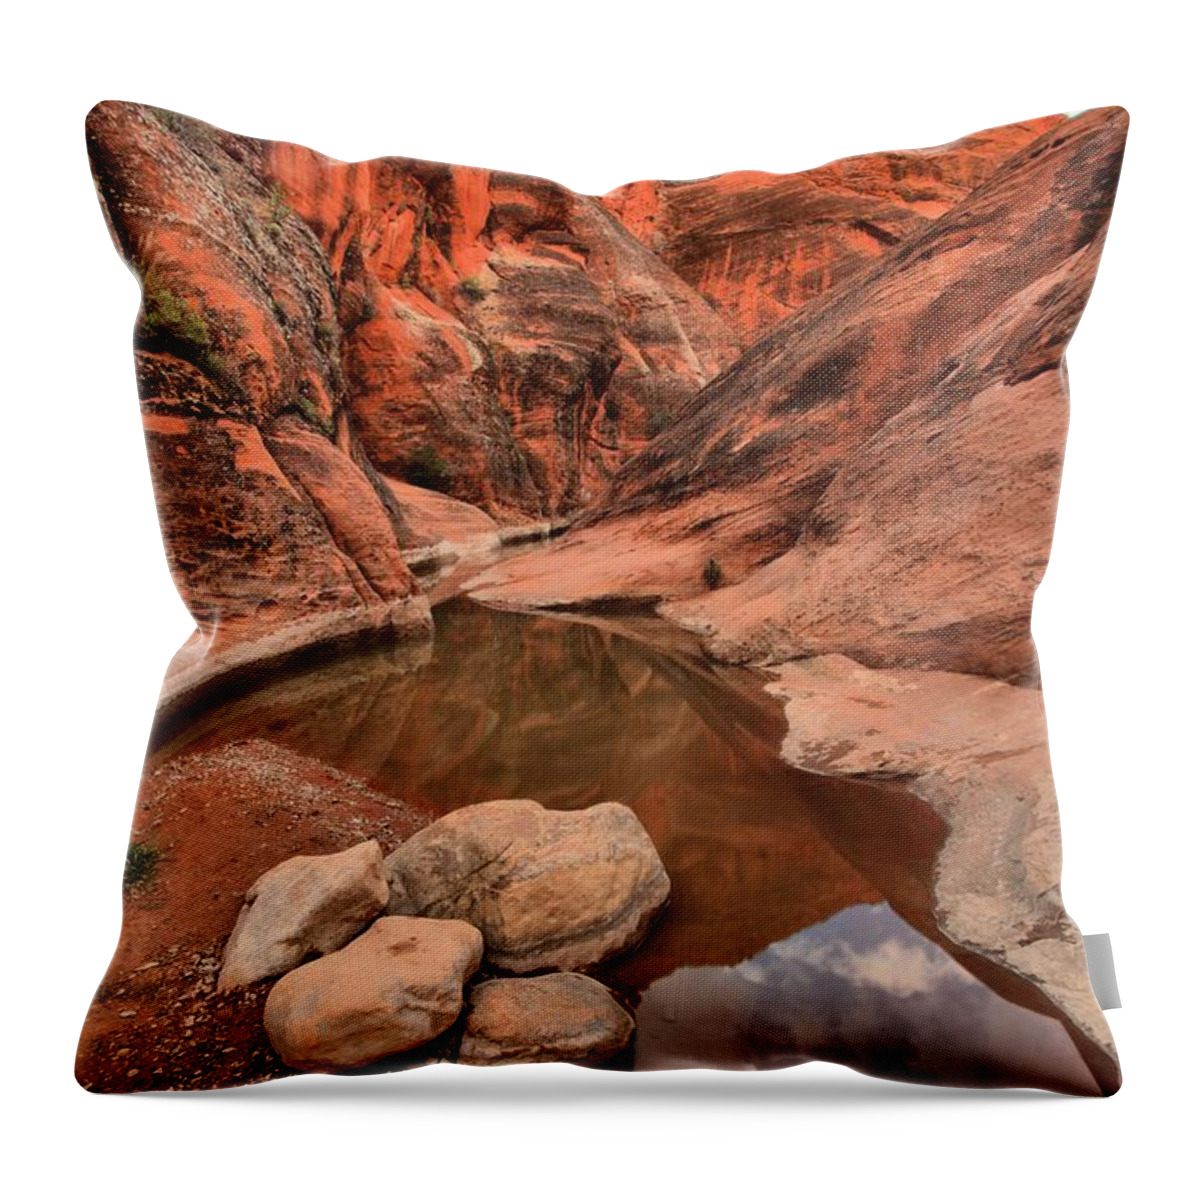 Slot Canyon Throw Pillow featuring the photograph Blue Skies Over Red Slots by Adam Jewell